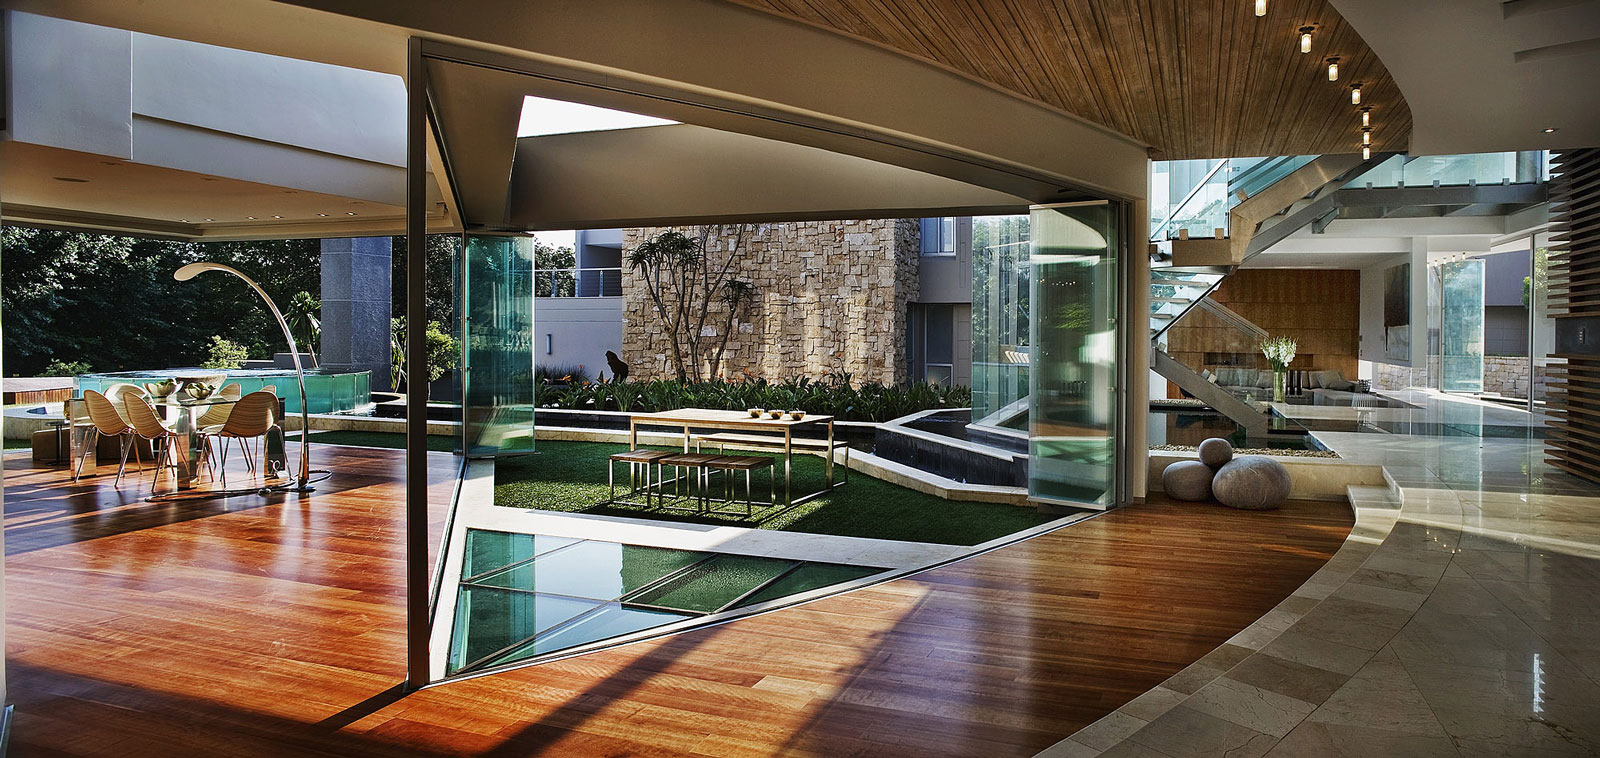 glass van der nico meulen architects south africa architecture story johannesburg contemporary